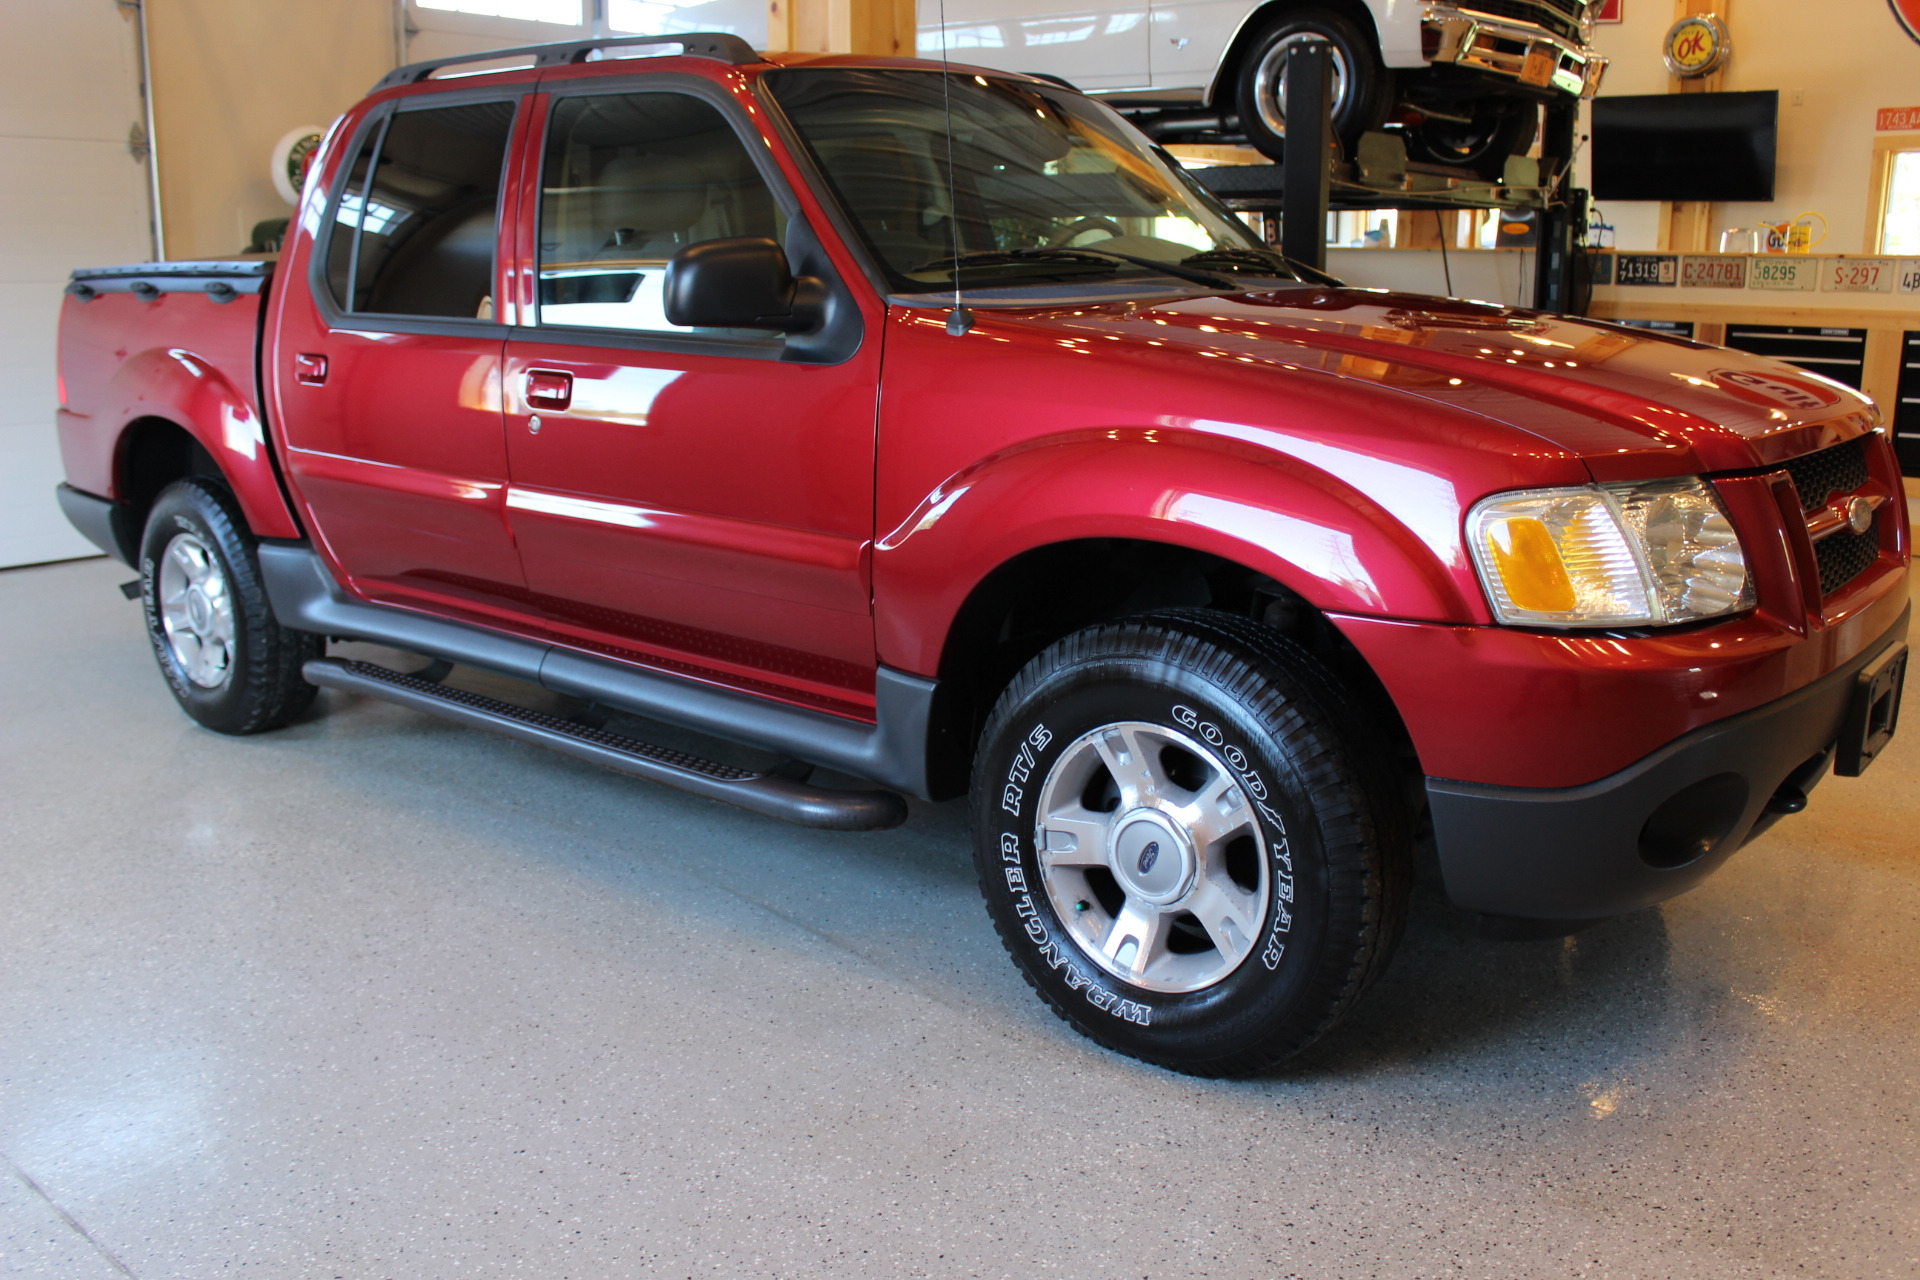 2004 Ford Explorer Sport Trac XLT - Biscayne Auto Sales | Pre-owned  Dealership | Ontario, NY